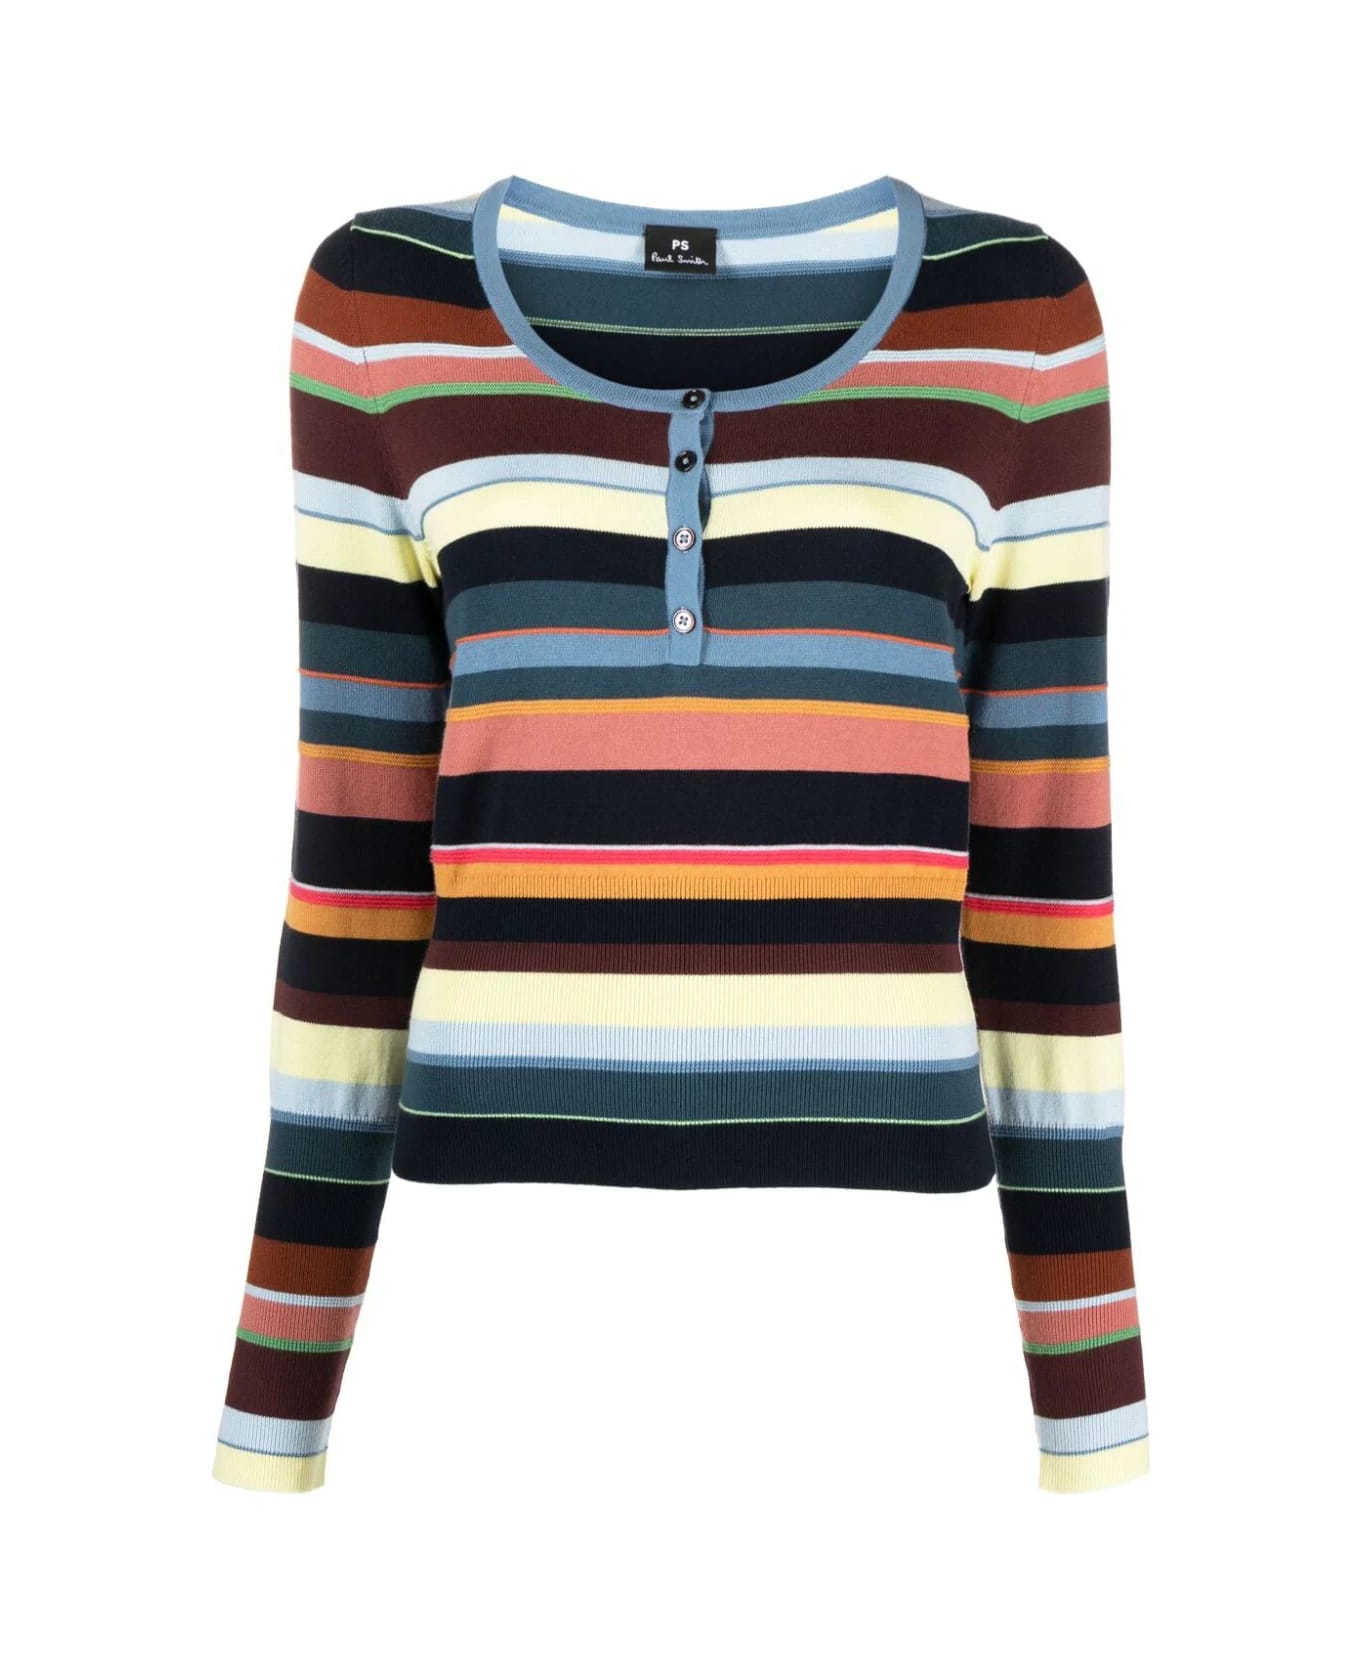 PS by Paul Smith Knitted Top - Multi